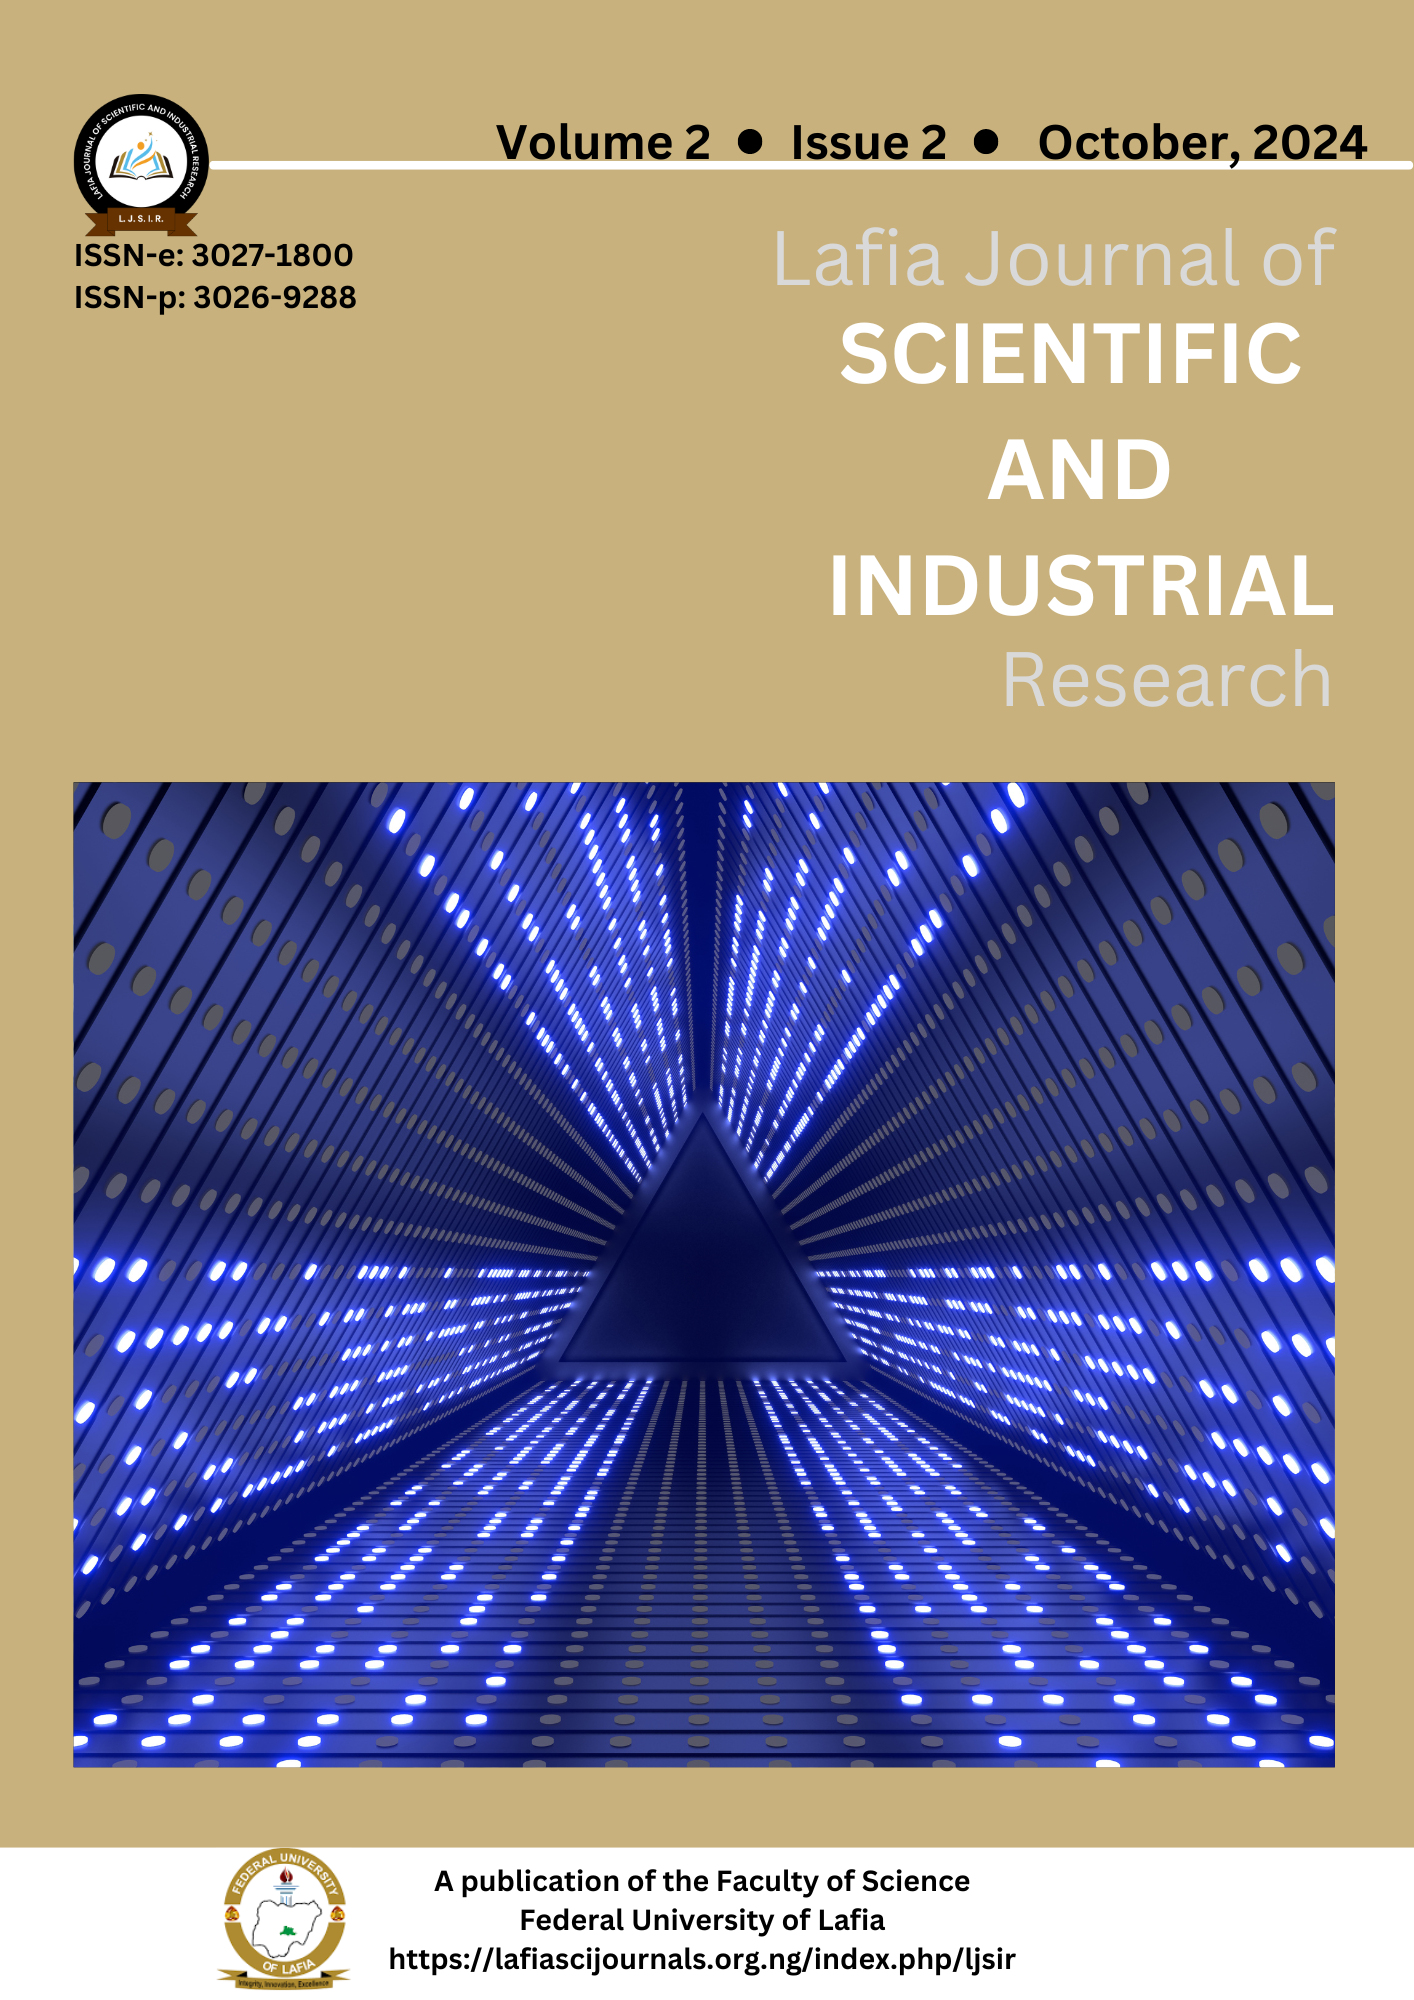 					Afficher Volume 2, Issue 2 (October, 2024), Lafia Journal of Scientific and Industrial Research (LJSIR) [IN PROGRESS]
				